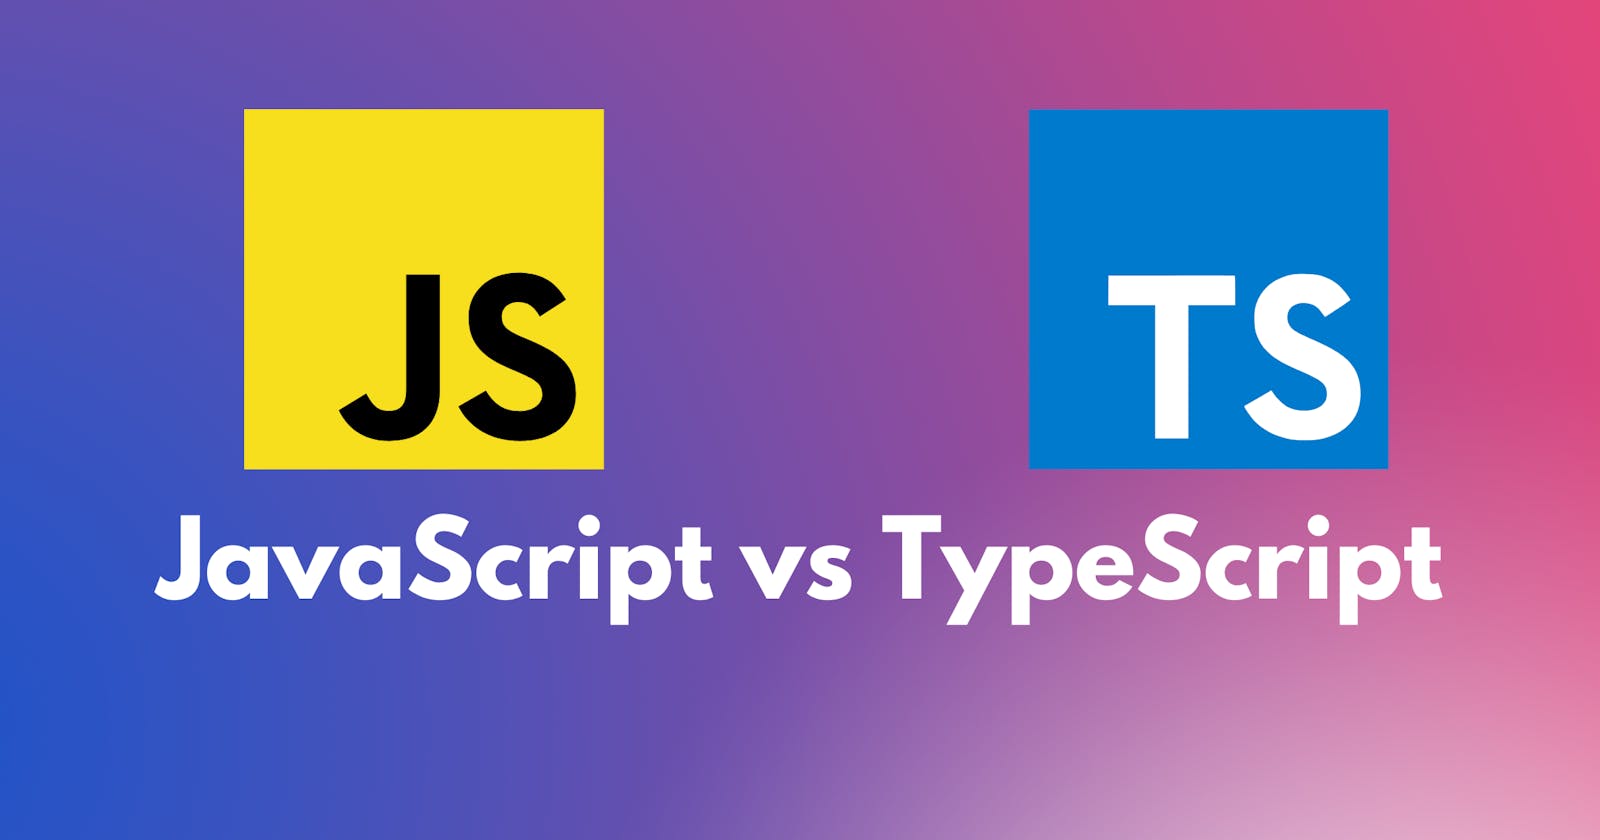 What are the pros and cons the JavaScript and TypeScript?